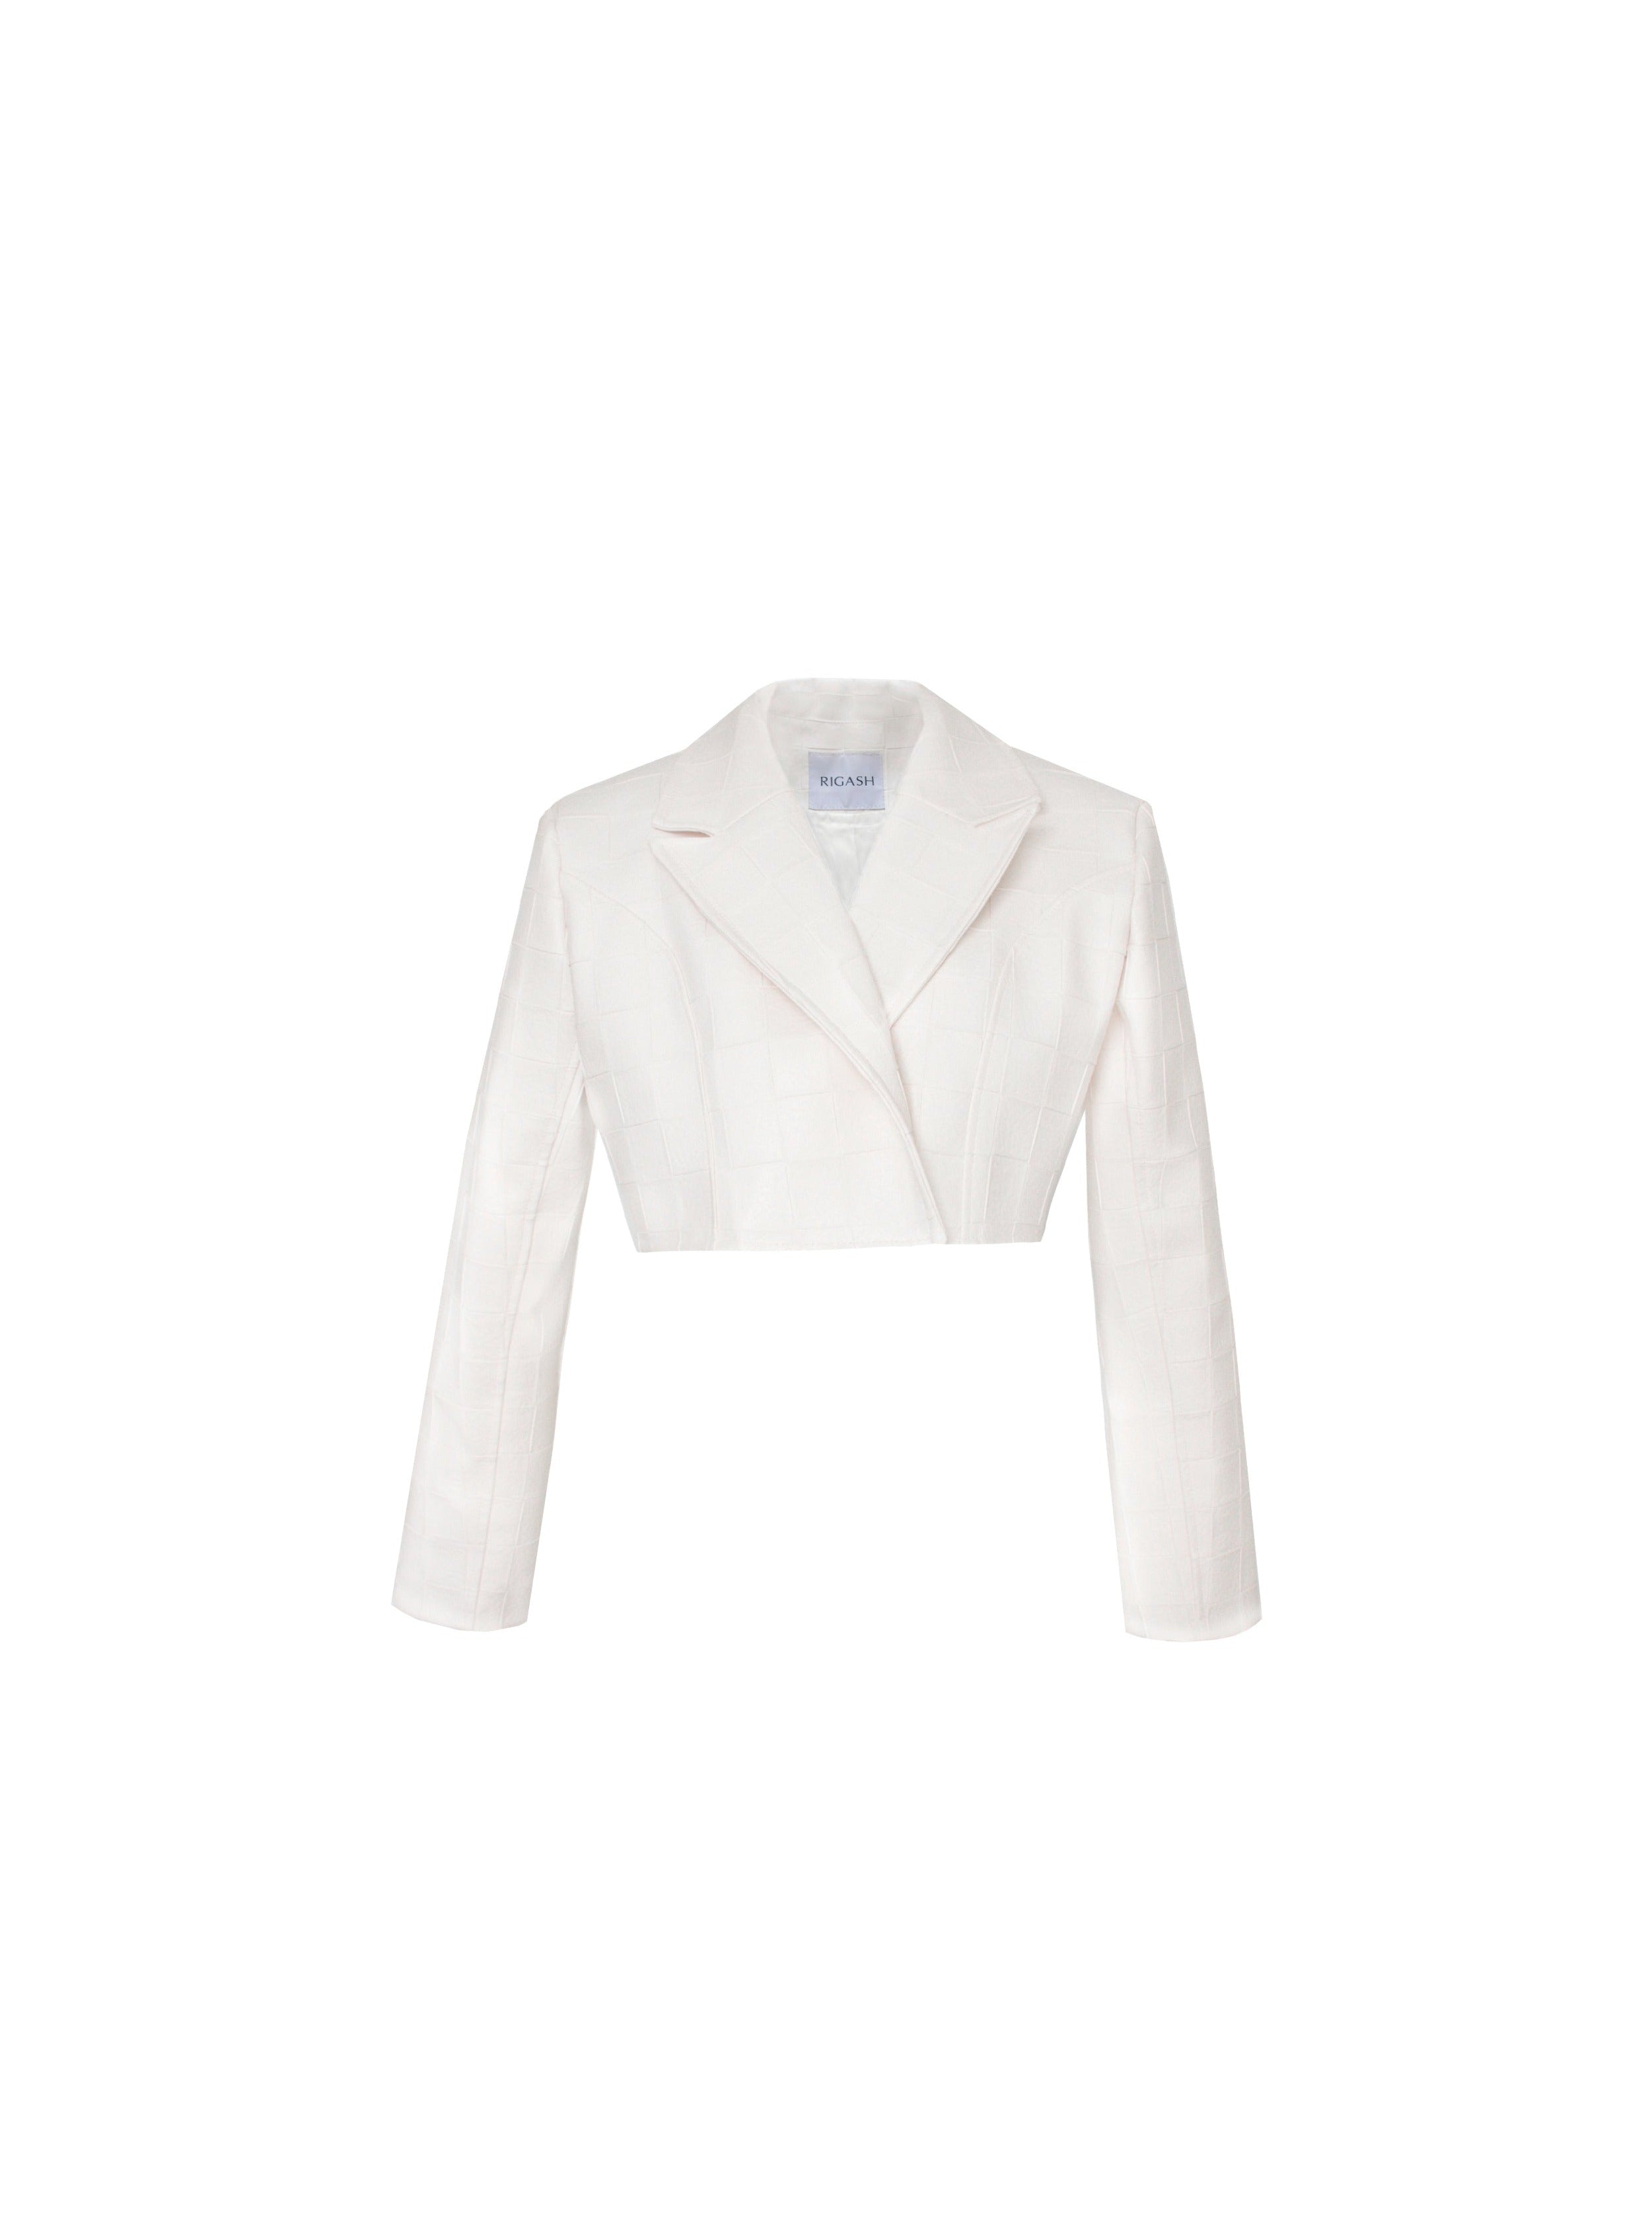 White checkered embossed cropped leather blazer.